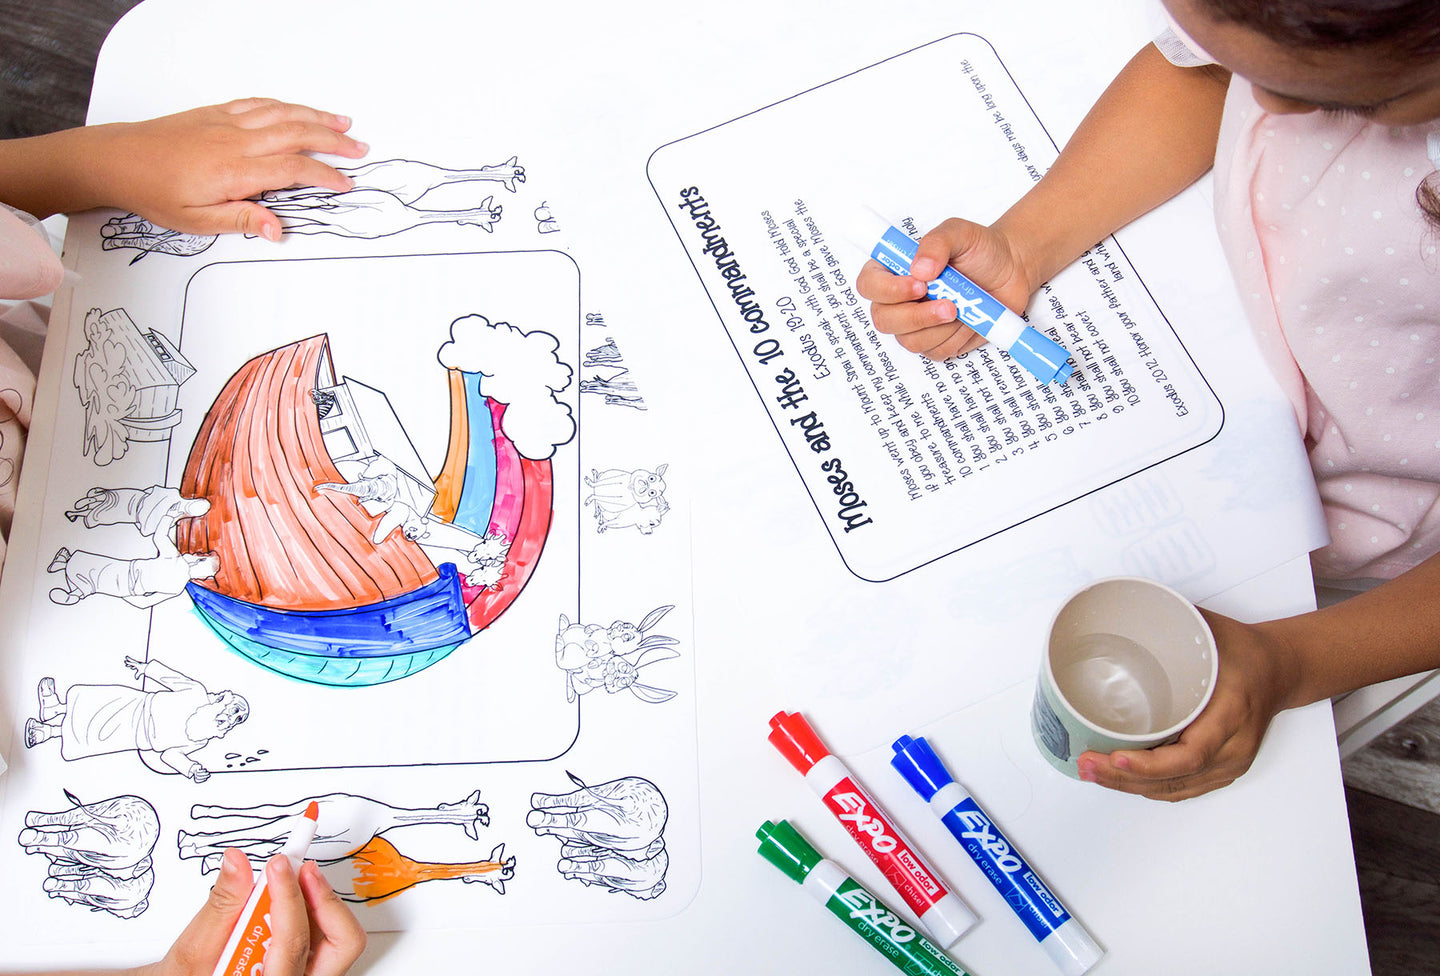 SILICONE MATS YOU CAN COLOR ON USING A DRY-ERASE MARKER.